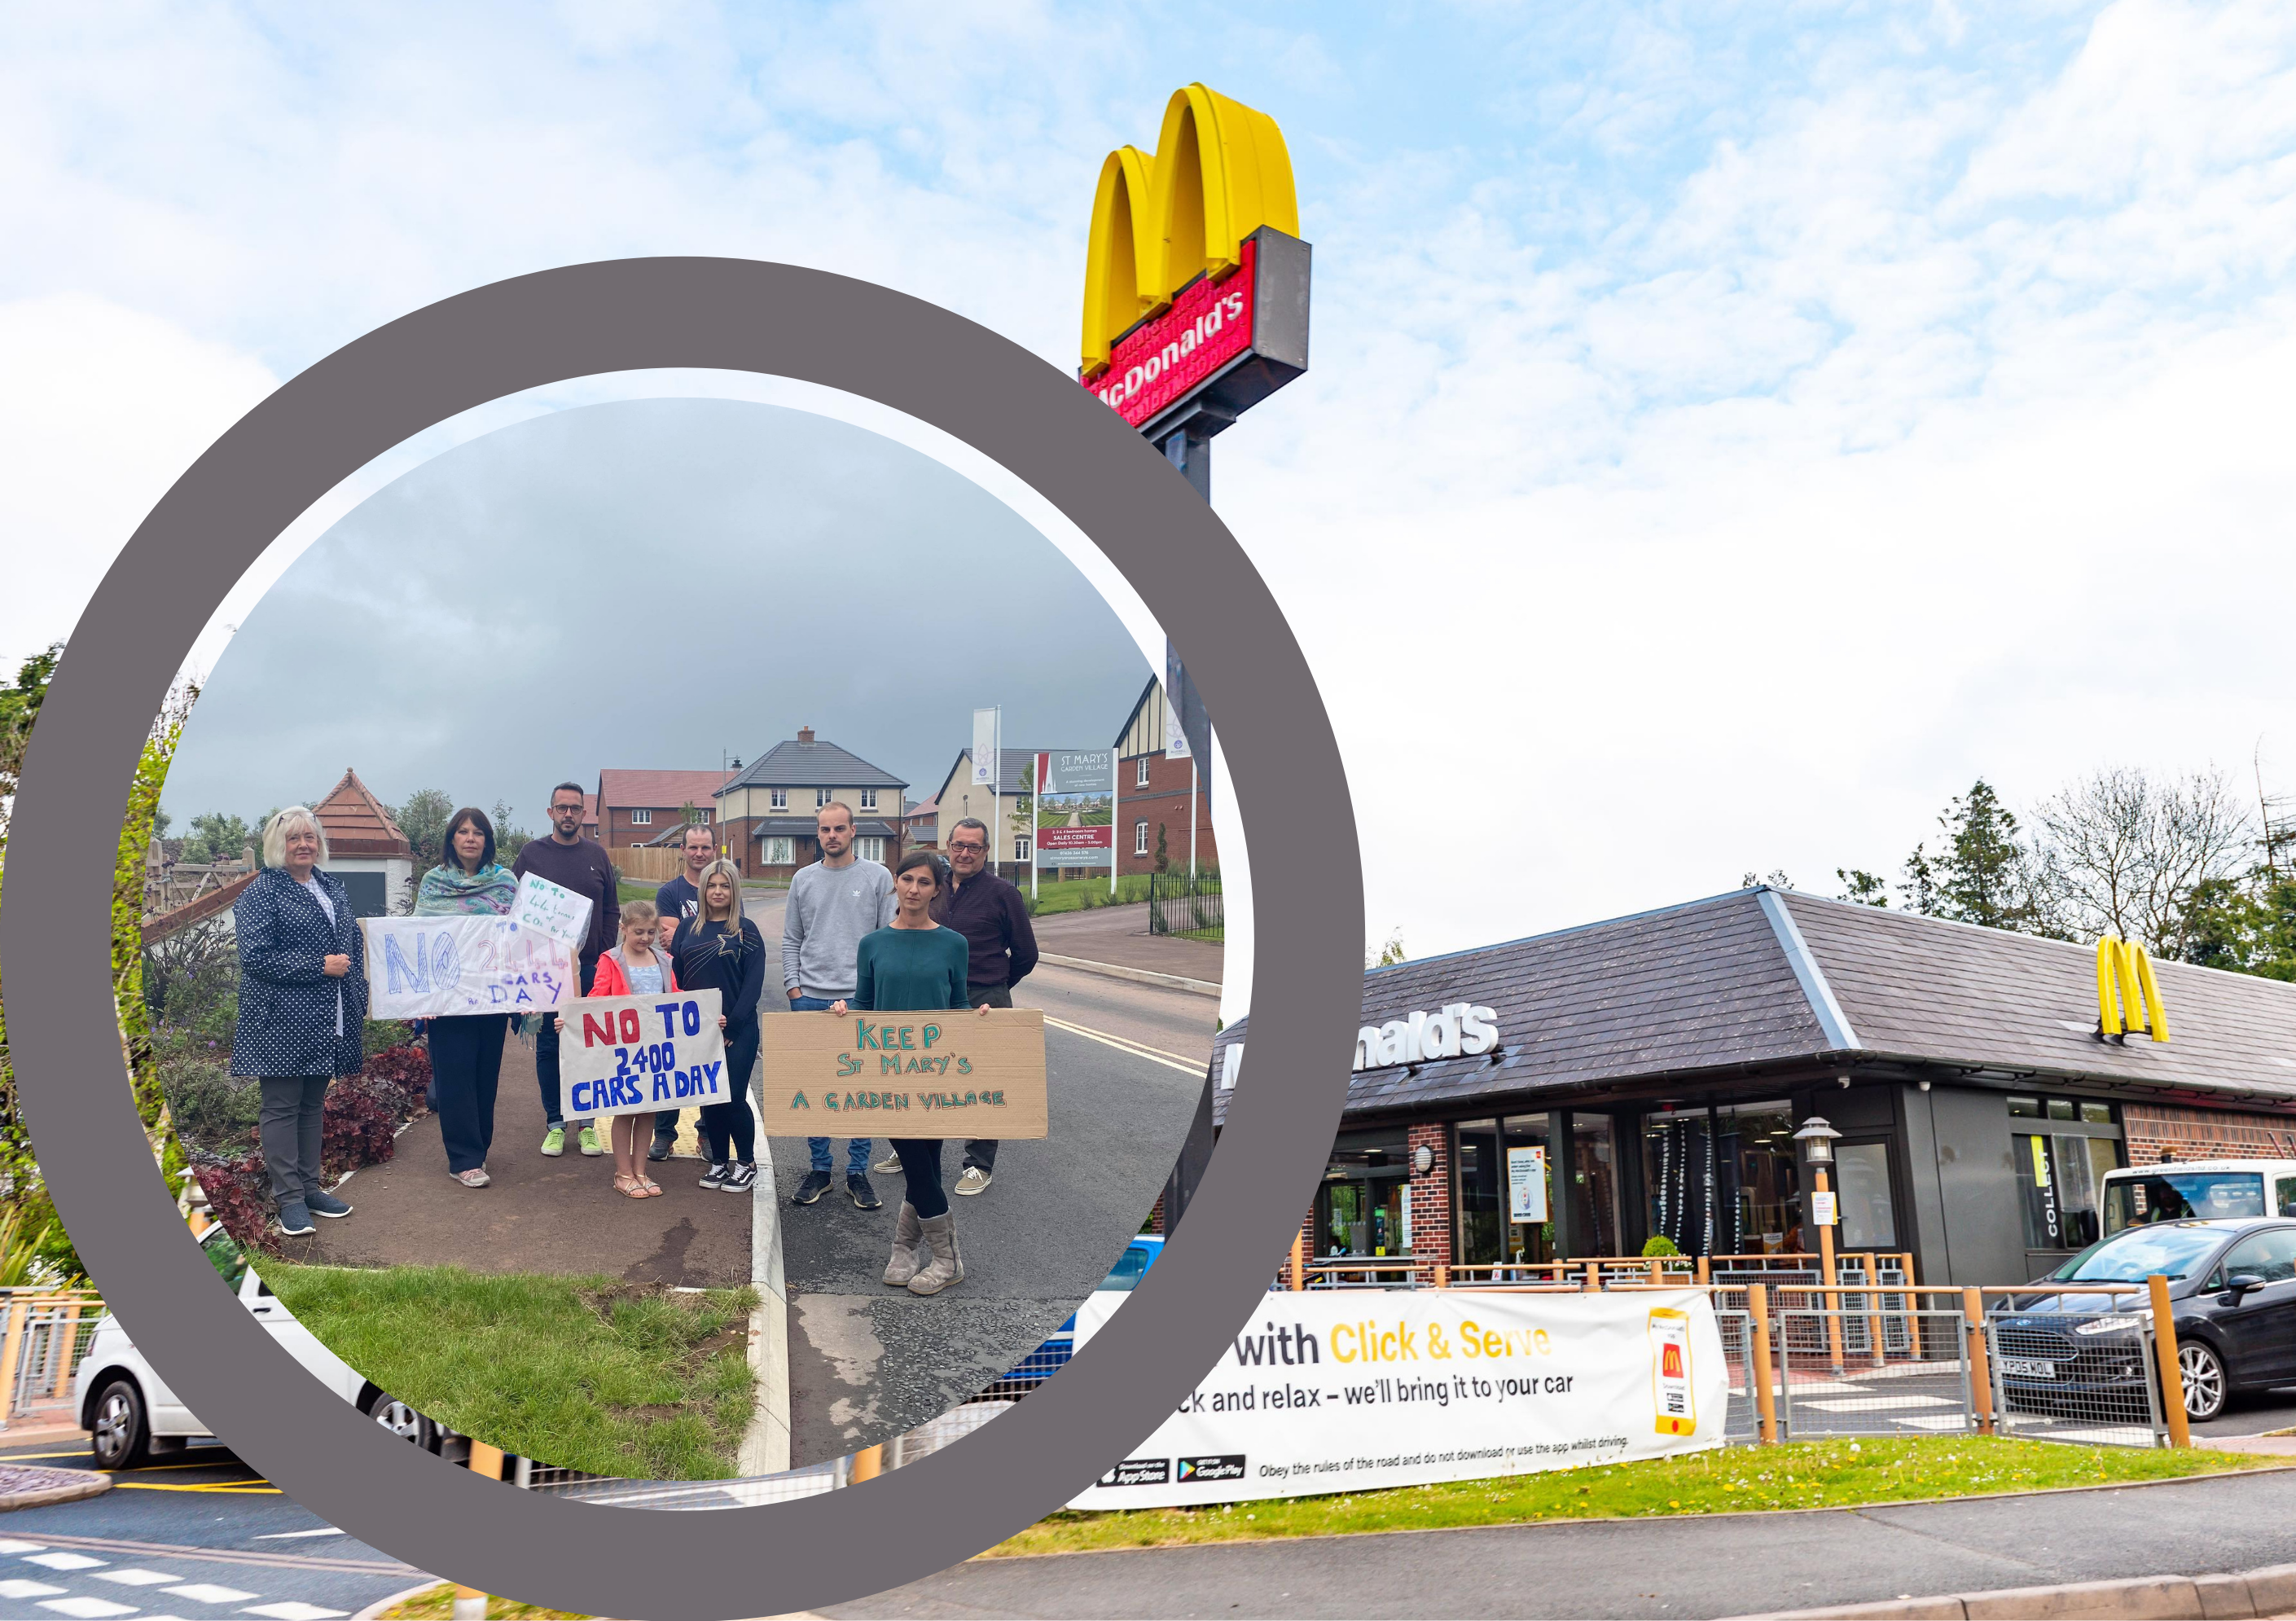 NEWS | Residents of new housing estate in Ross-on-Wye share concerns over plans for a 24 hour McDonald’s Drive-Thru